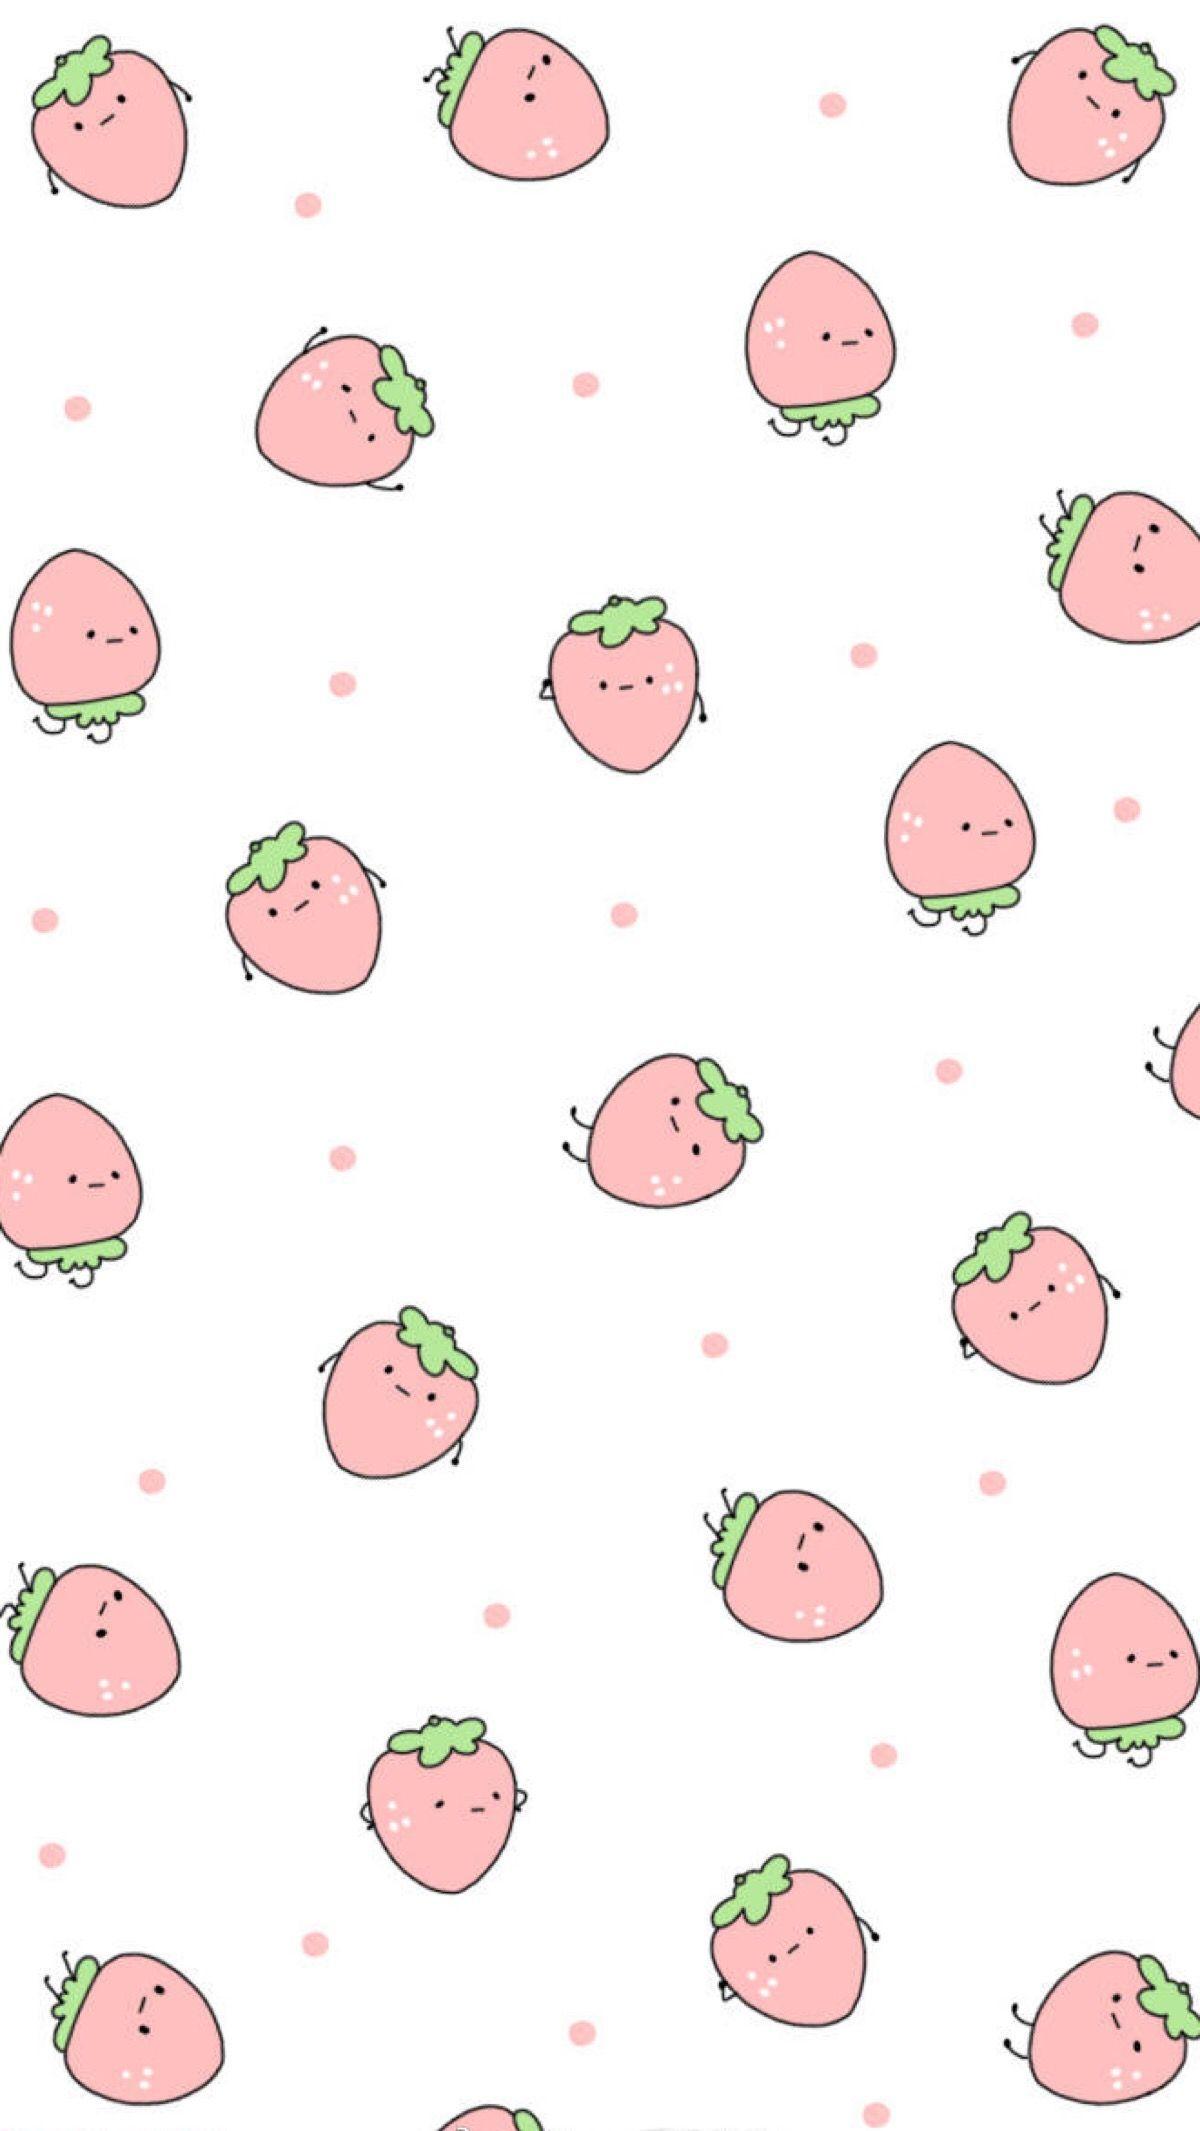 Strawberry Aesthetic Wallpapers Top Free Strawberry Aesthetic Backgrounds Wallpaperaccess See more ideas about pink aesthetic, strawberry milk, pastel aesthetic. strawberry aesthetic wallpapers top